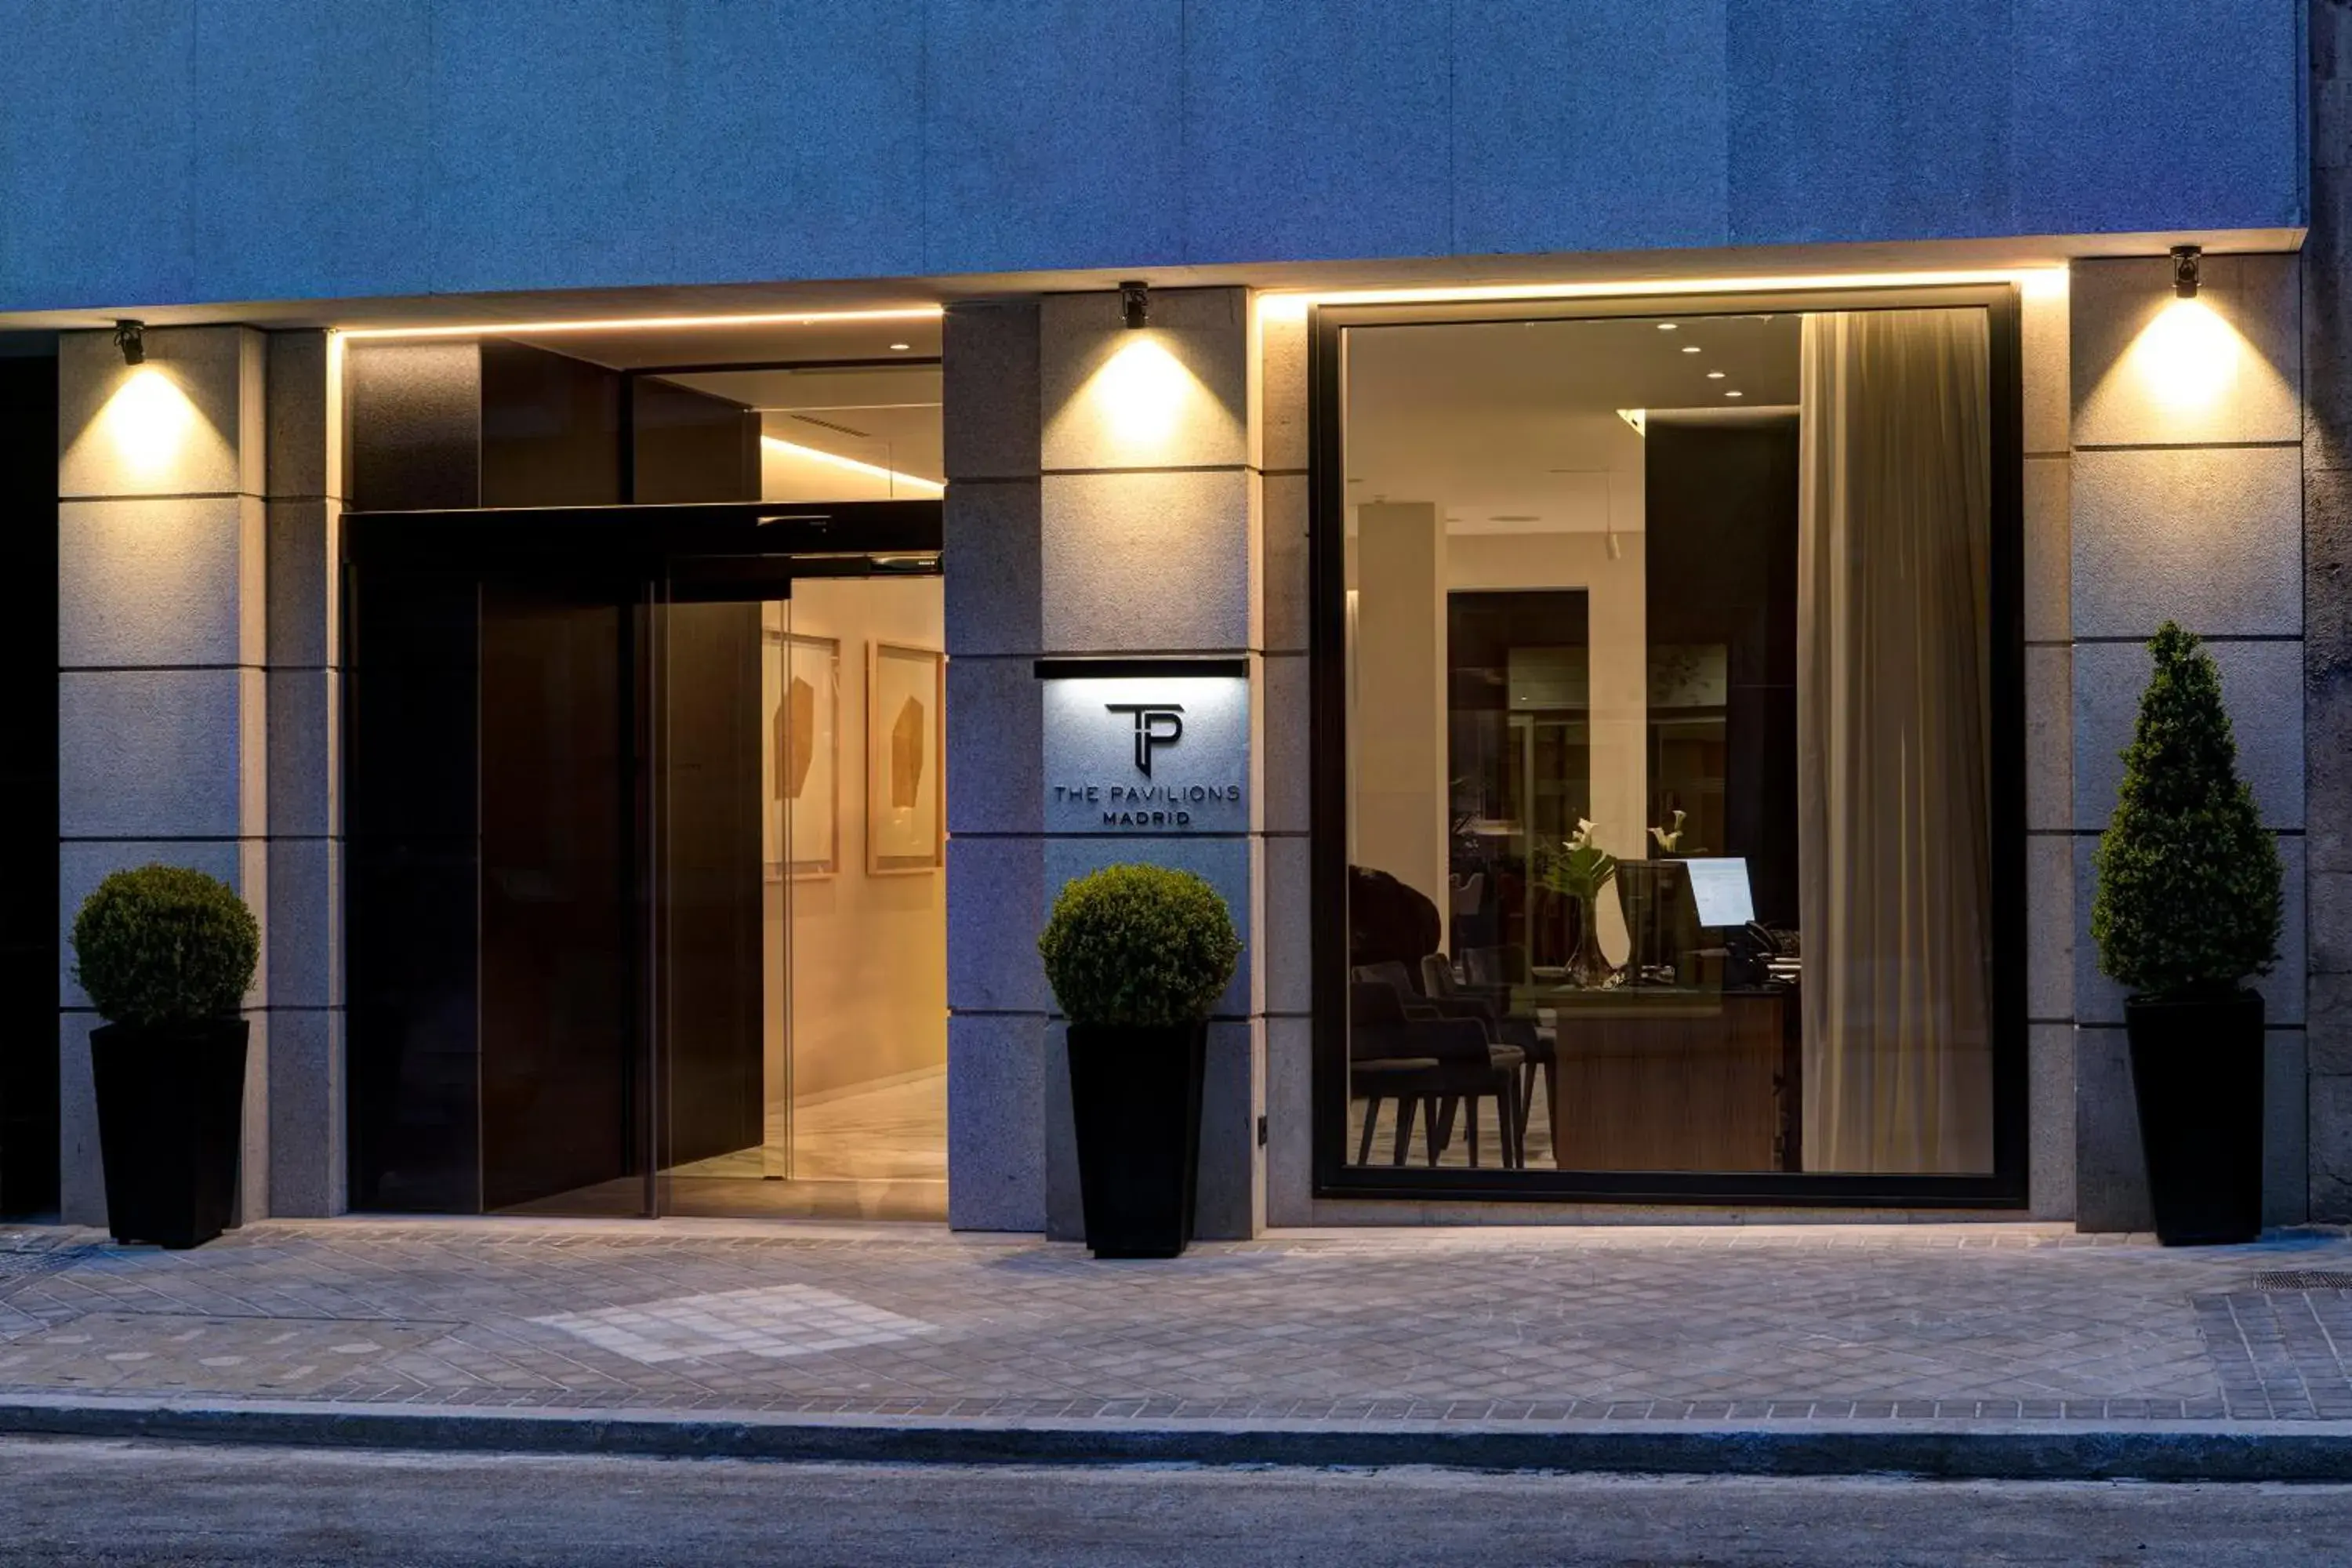 Facade/entrance in The Pavilions Madrid Hotel